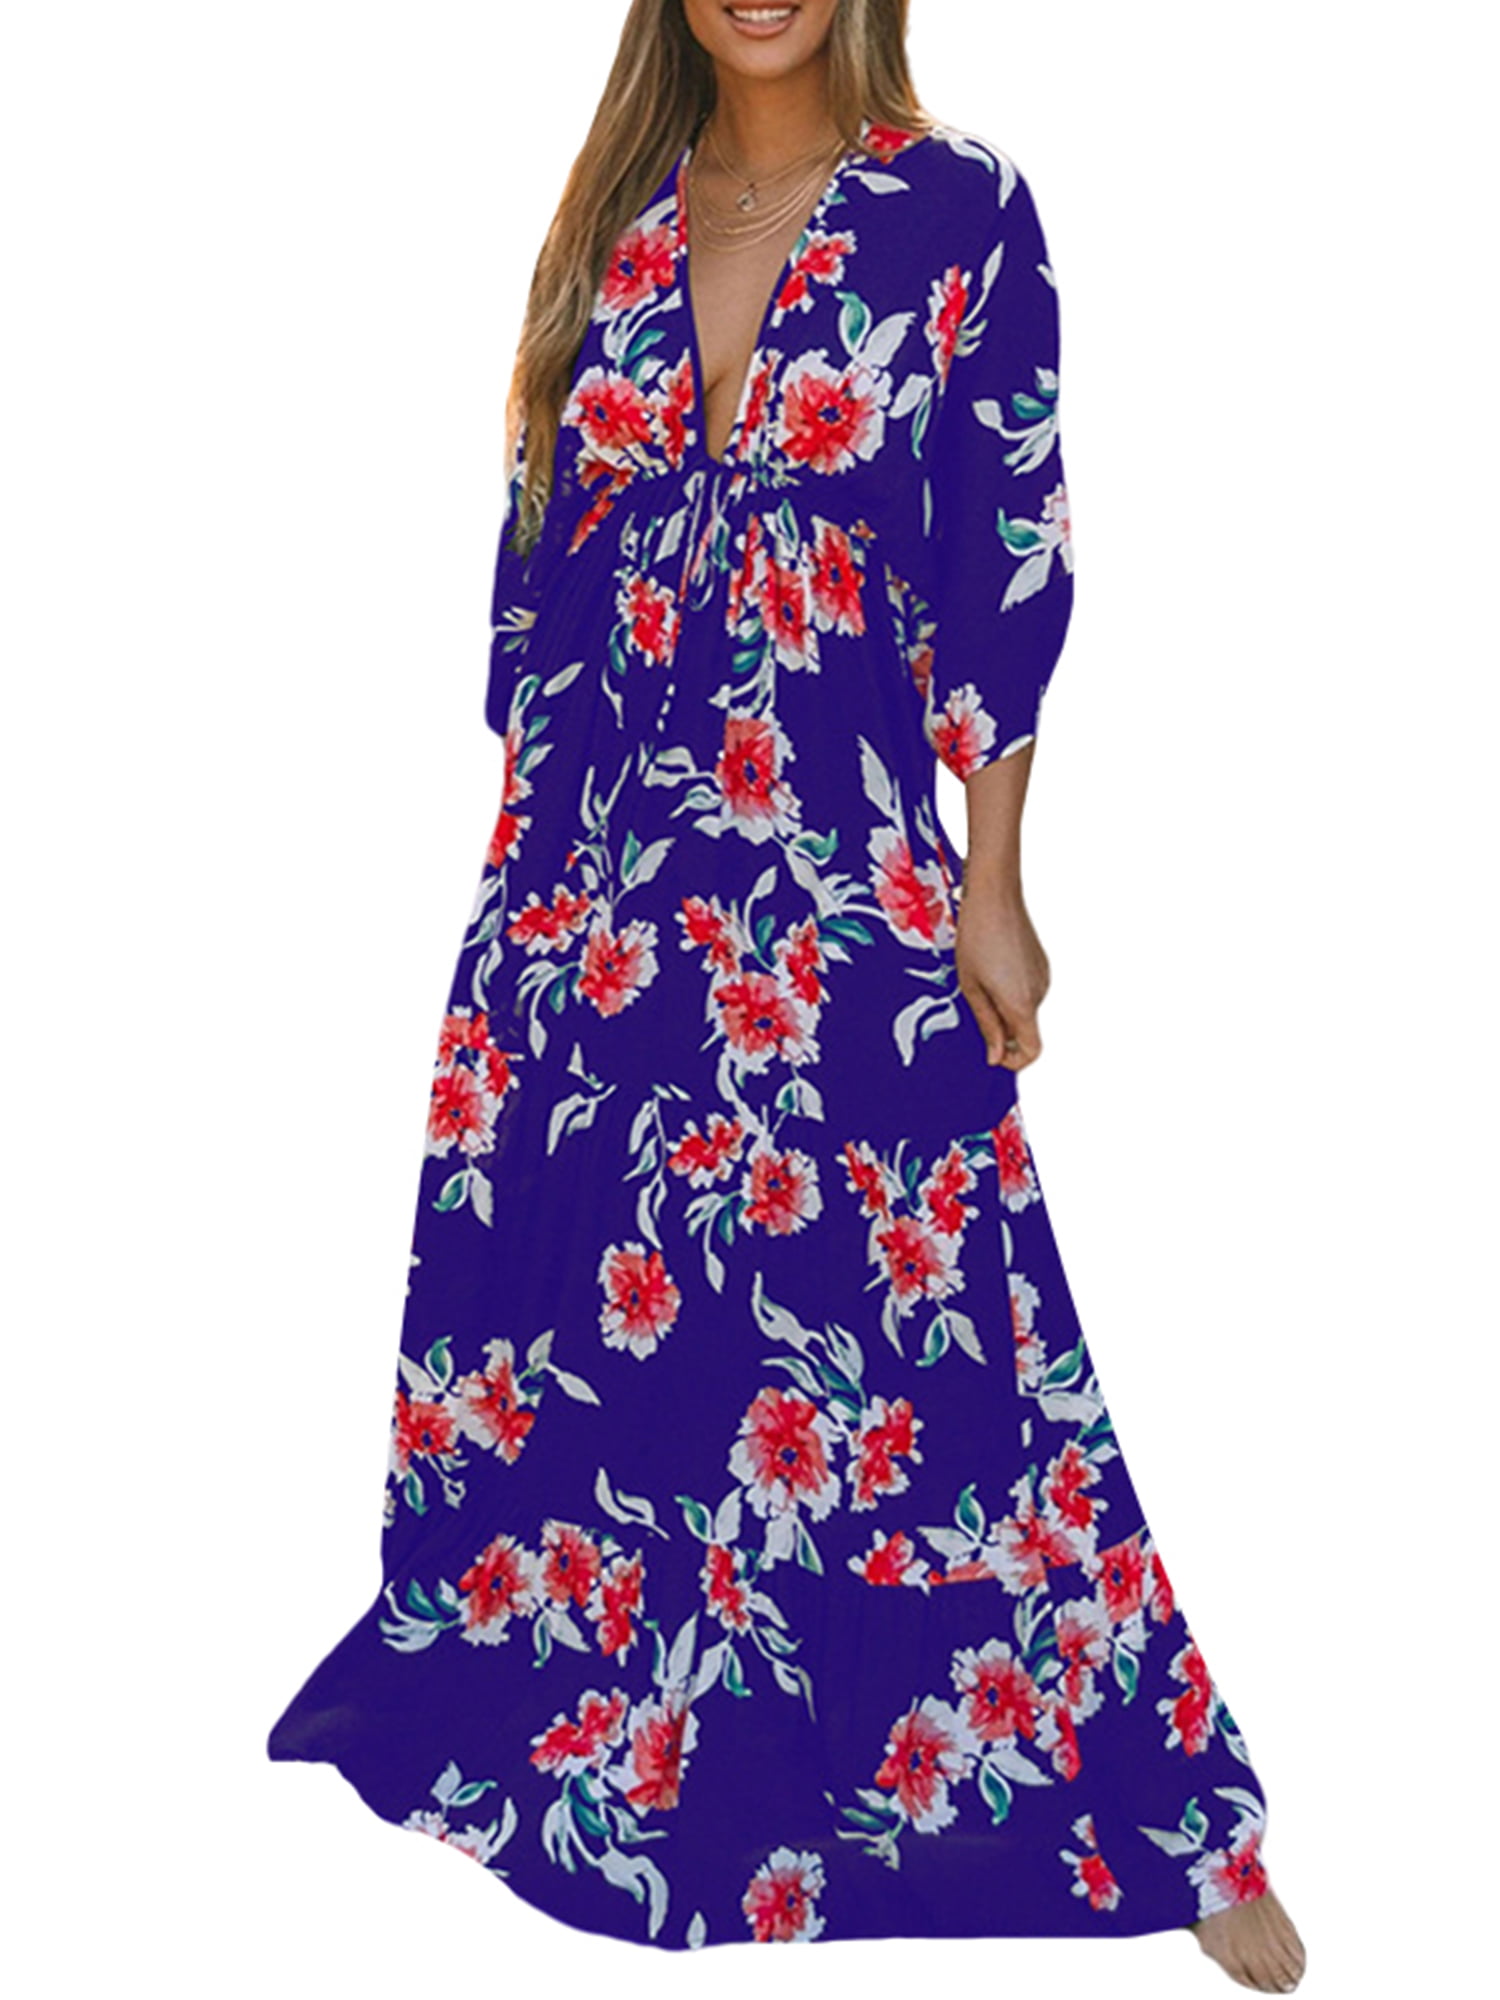 Women Floral Print Baggy Holiday Party Maxi Dress Loose Long Sleeveless Dresses 